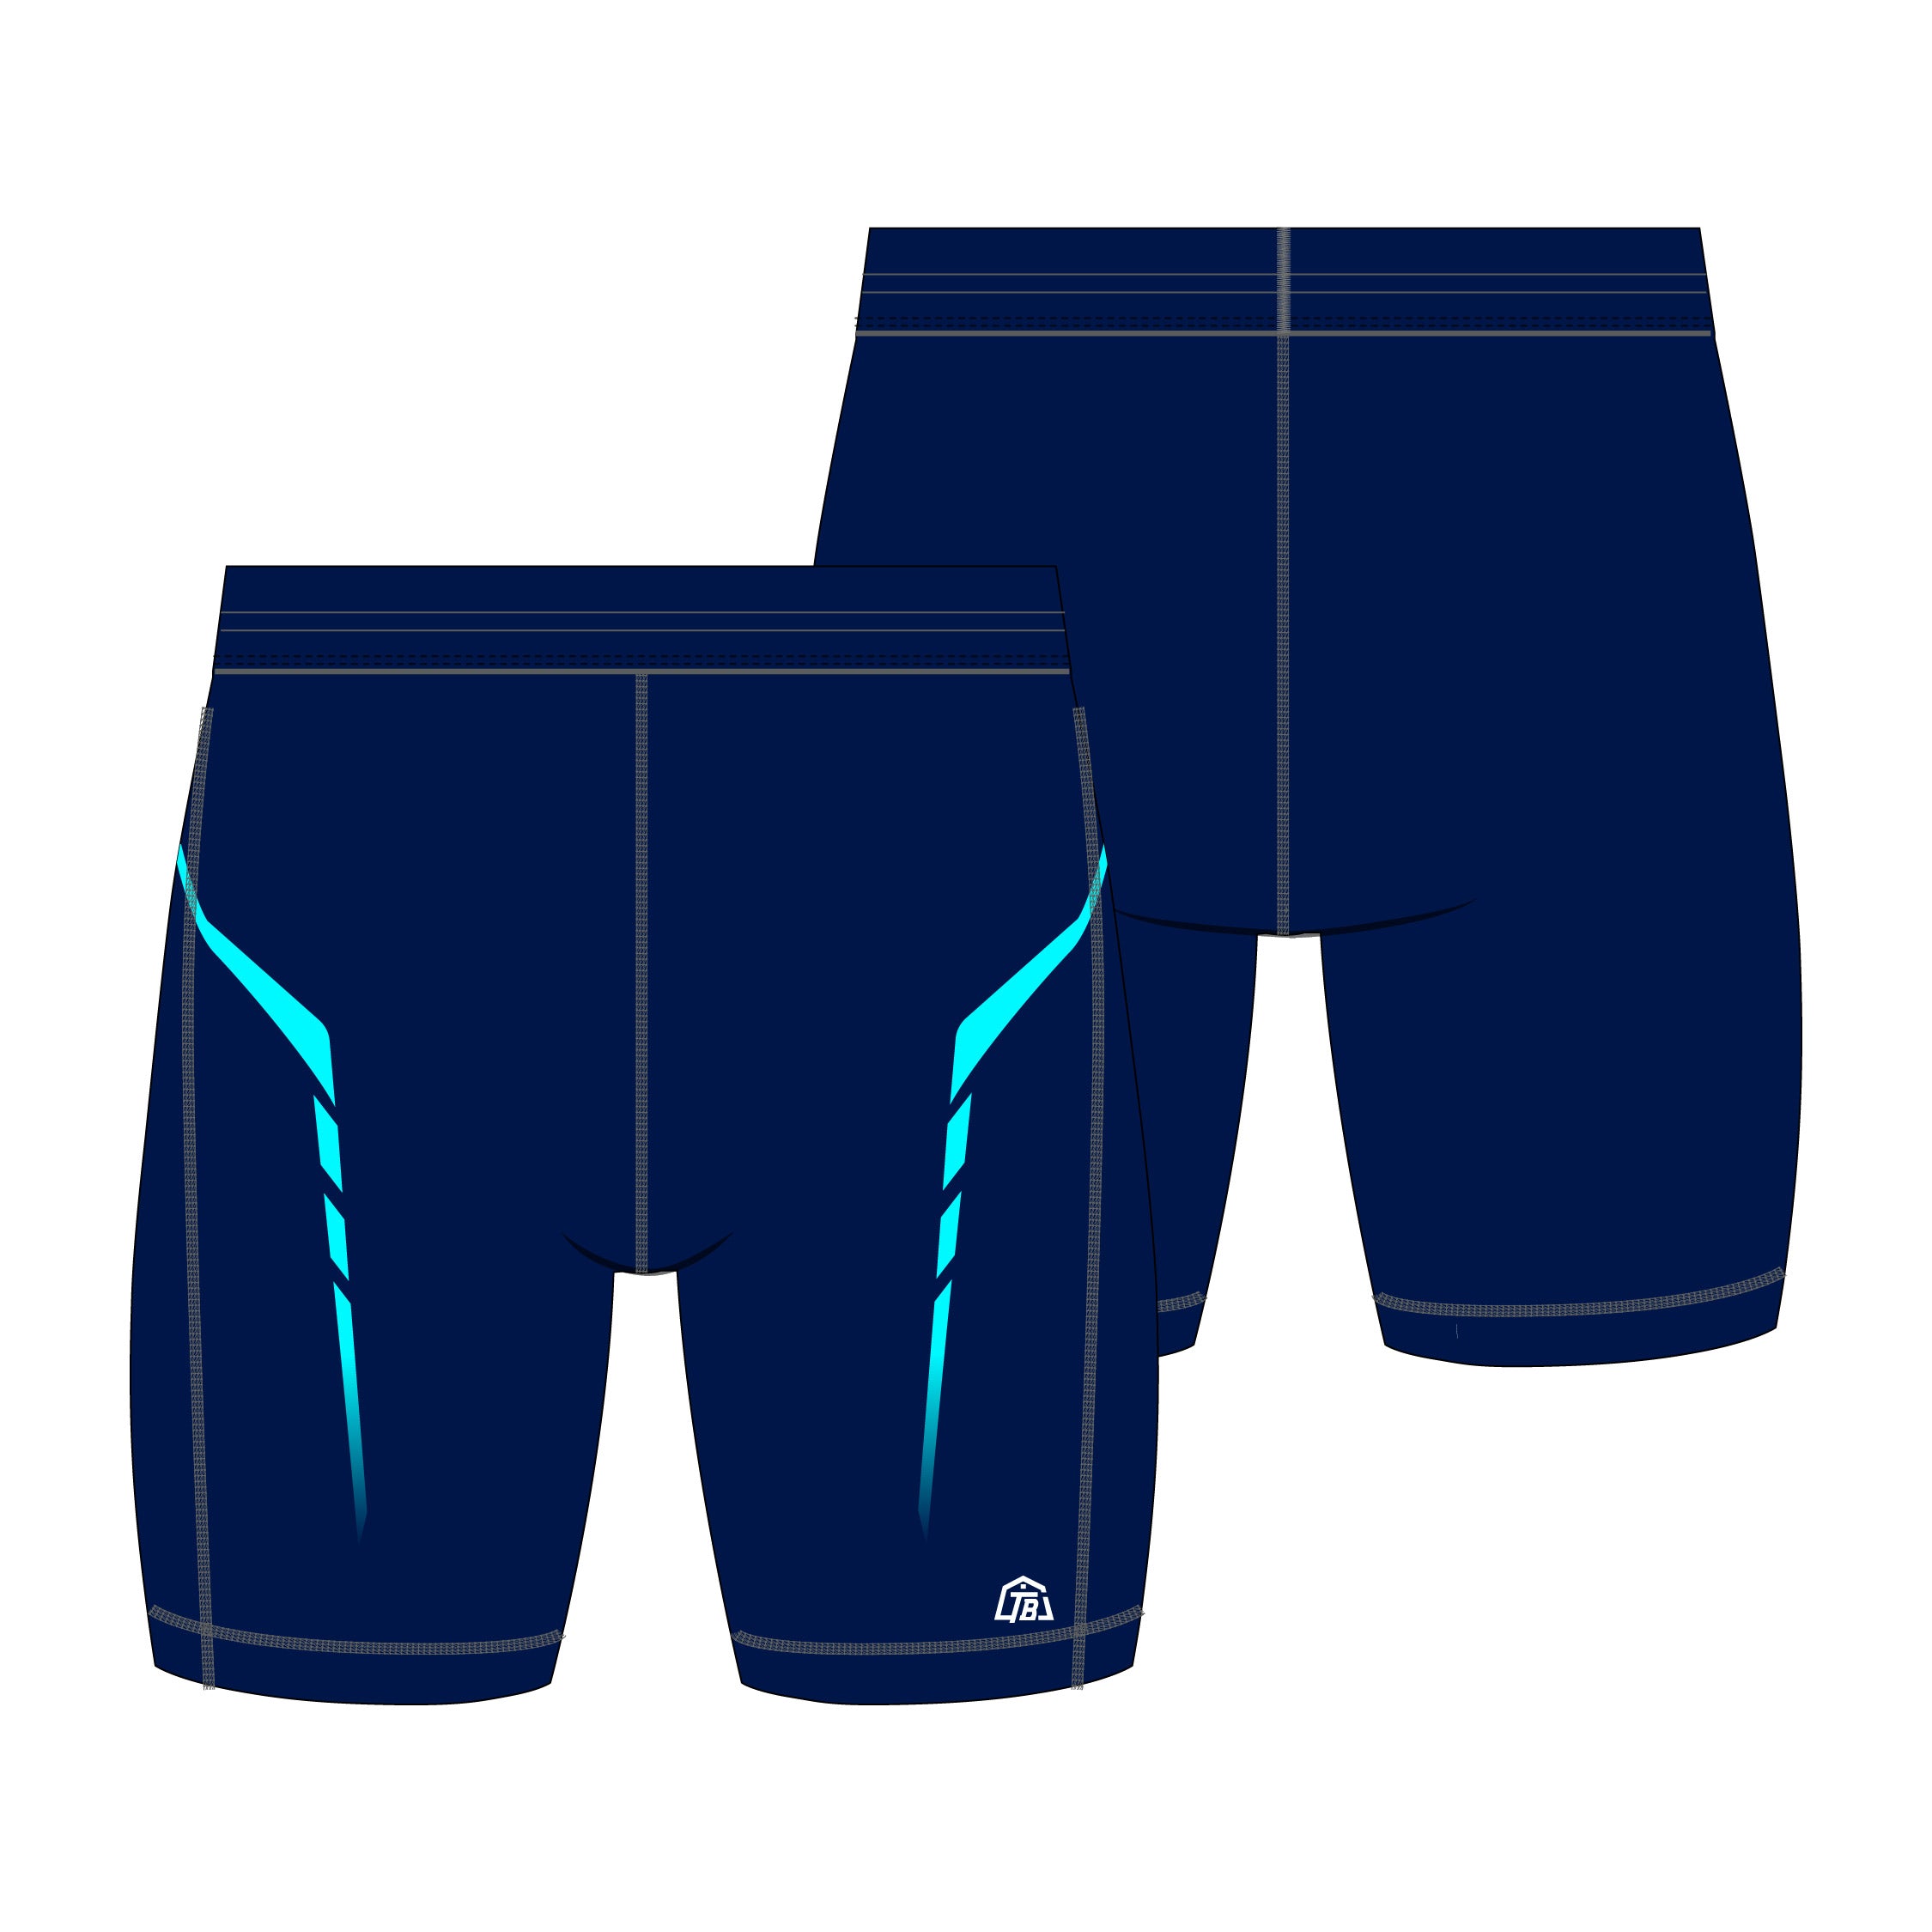 Youth Compression Short